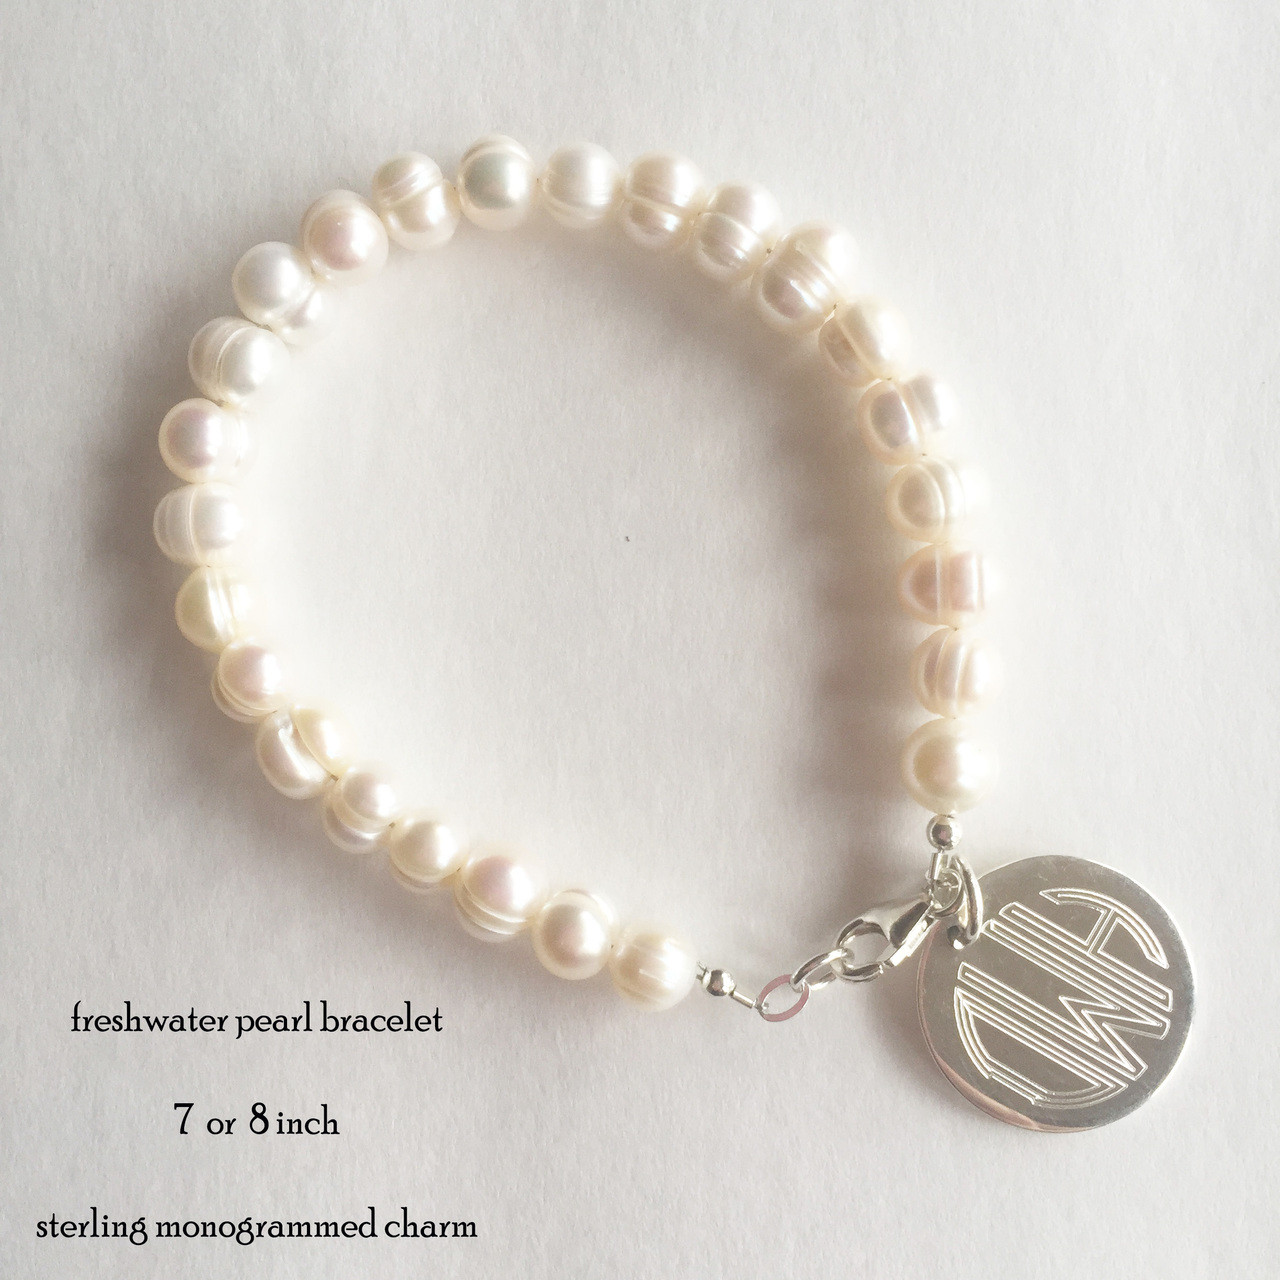 jacqueline freshwater pearl bracelet with sterling monogrammed charm